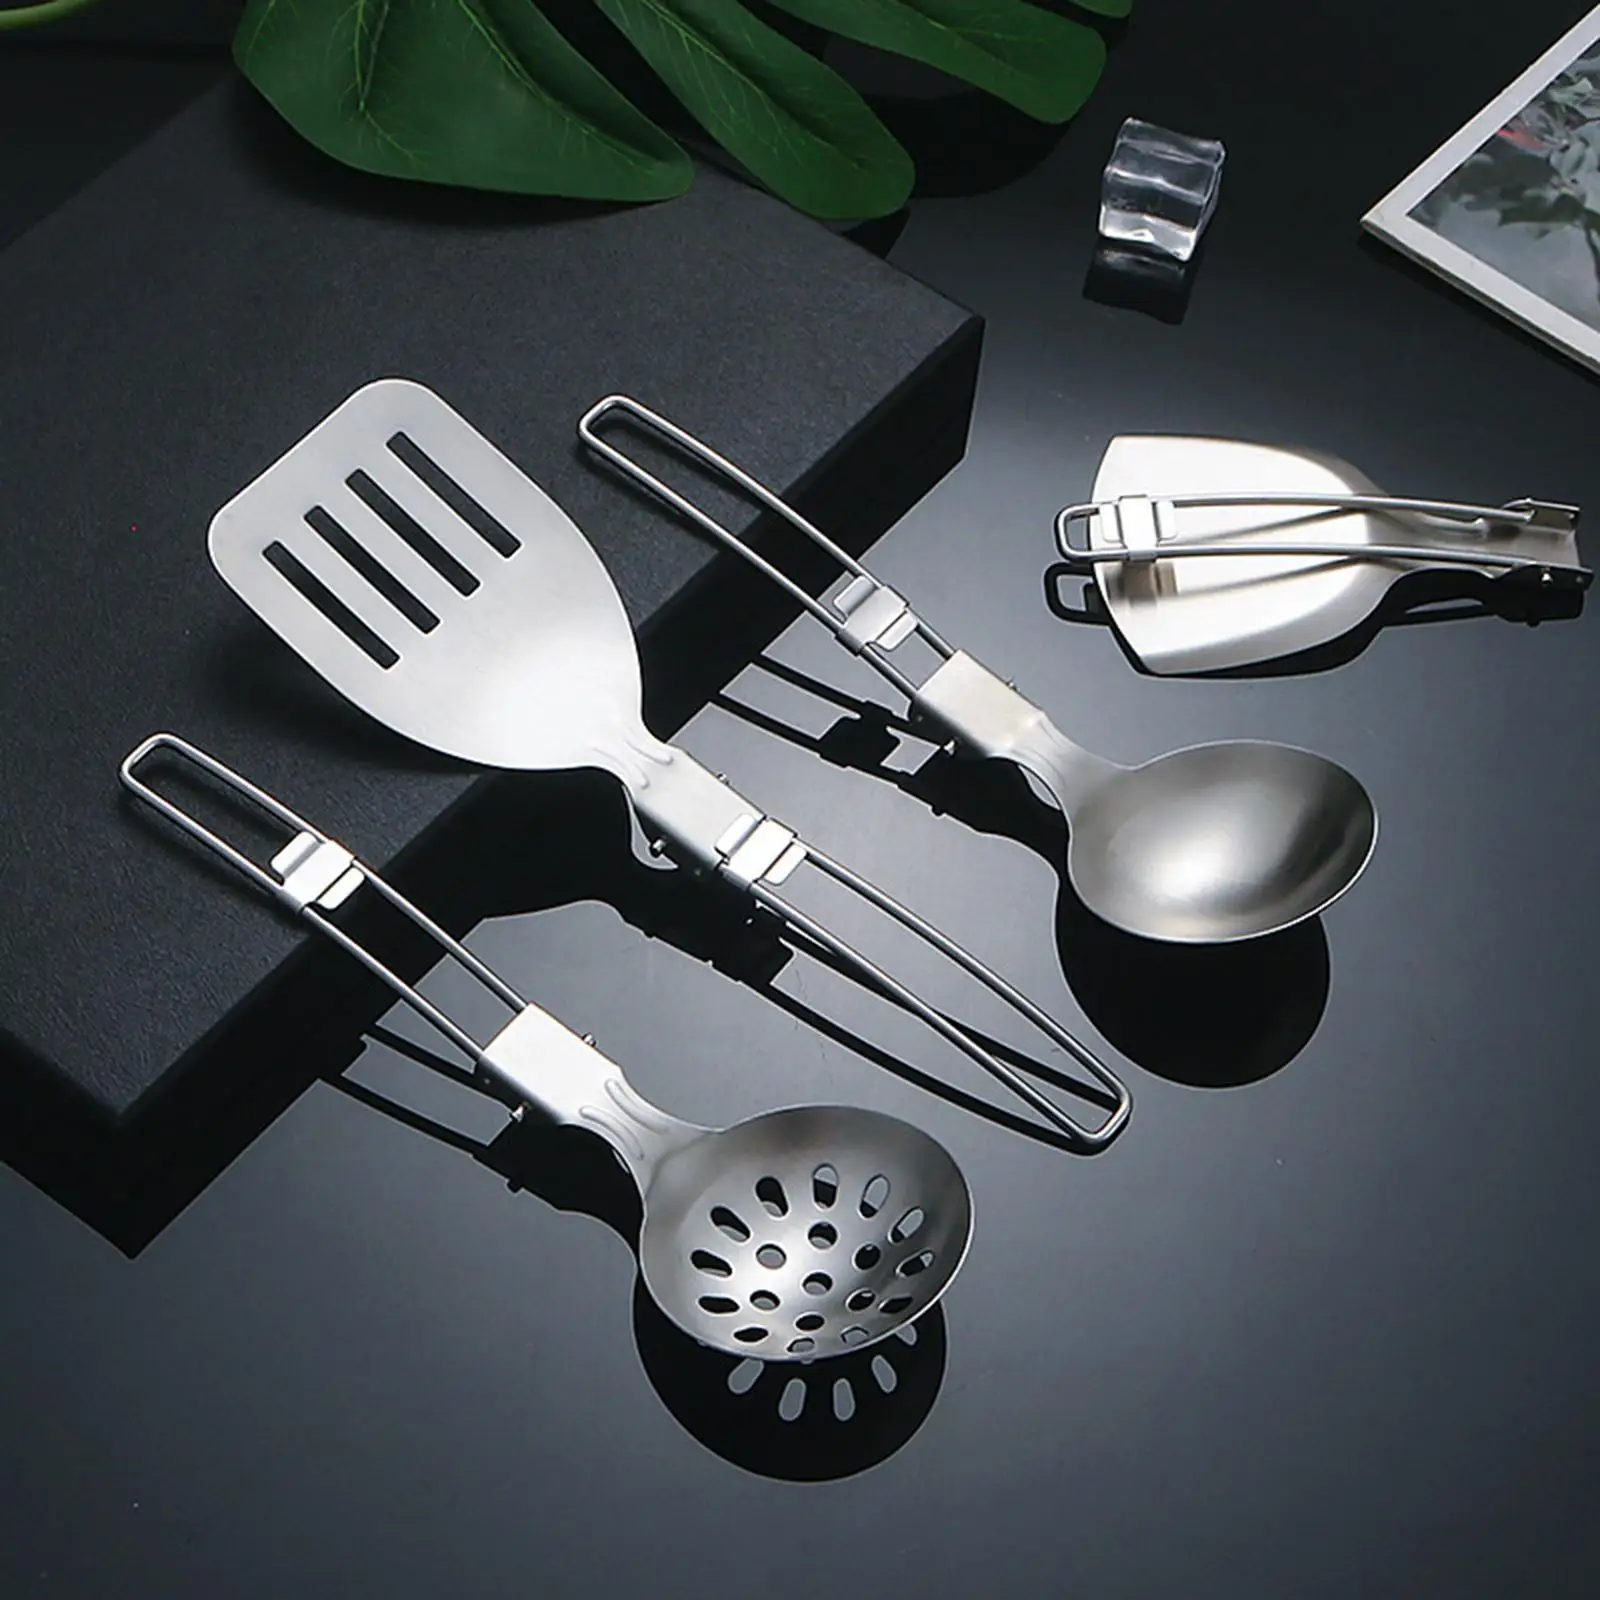 6 Pieces Camp Cooking Utensil Set 304 Stainless Steel Metal Cooking Camping Kitchen Utensil Set for Camp BBQ Picnic Hiking RV